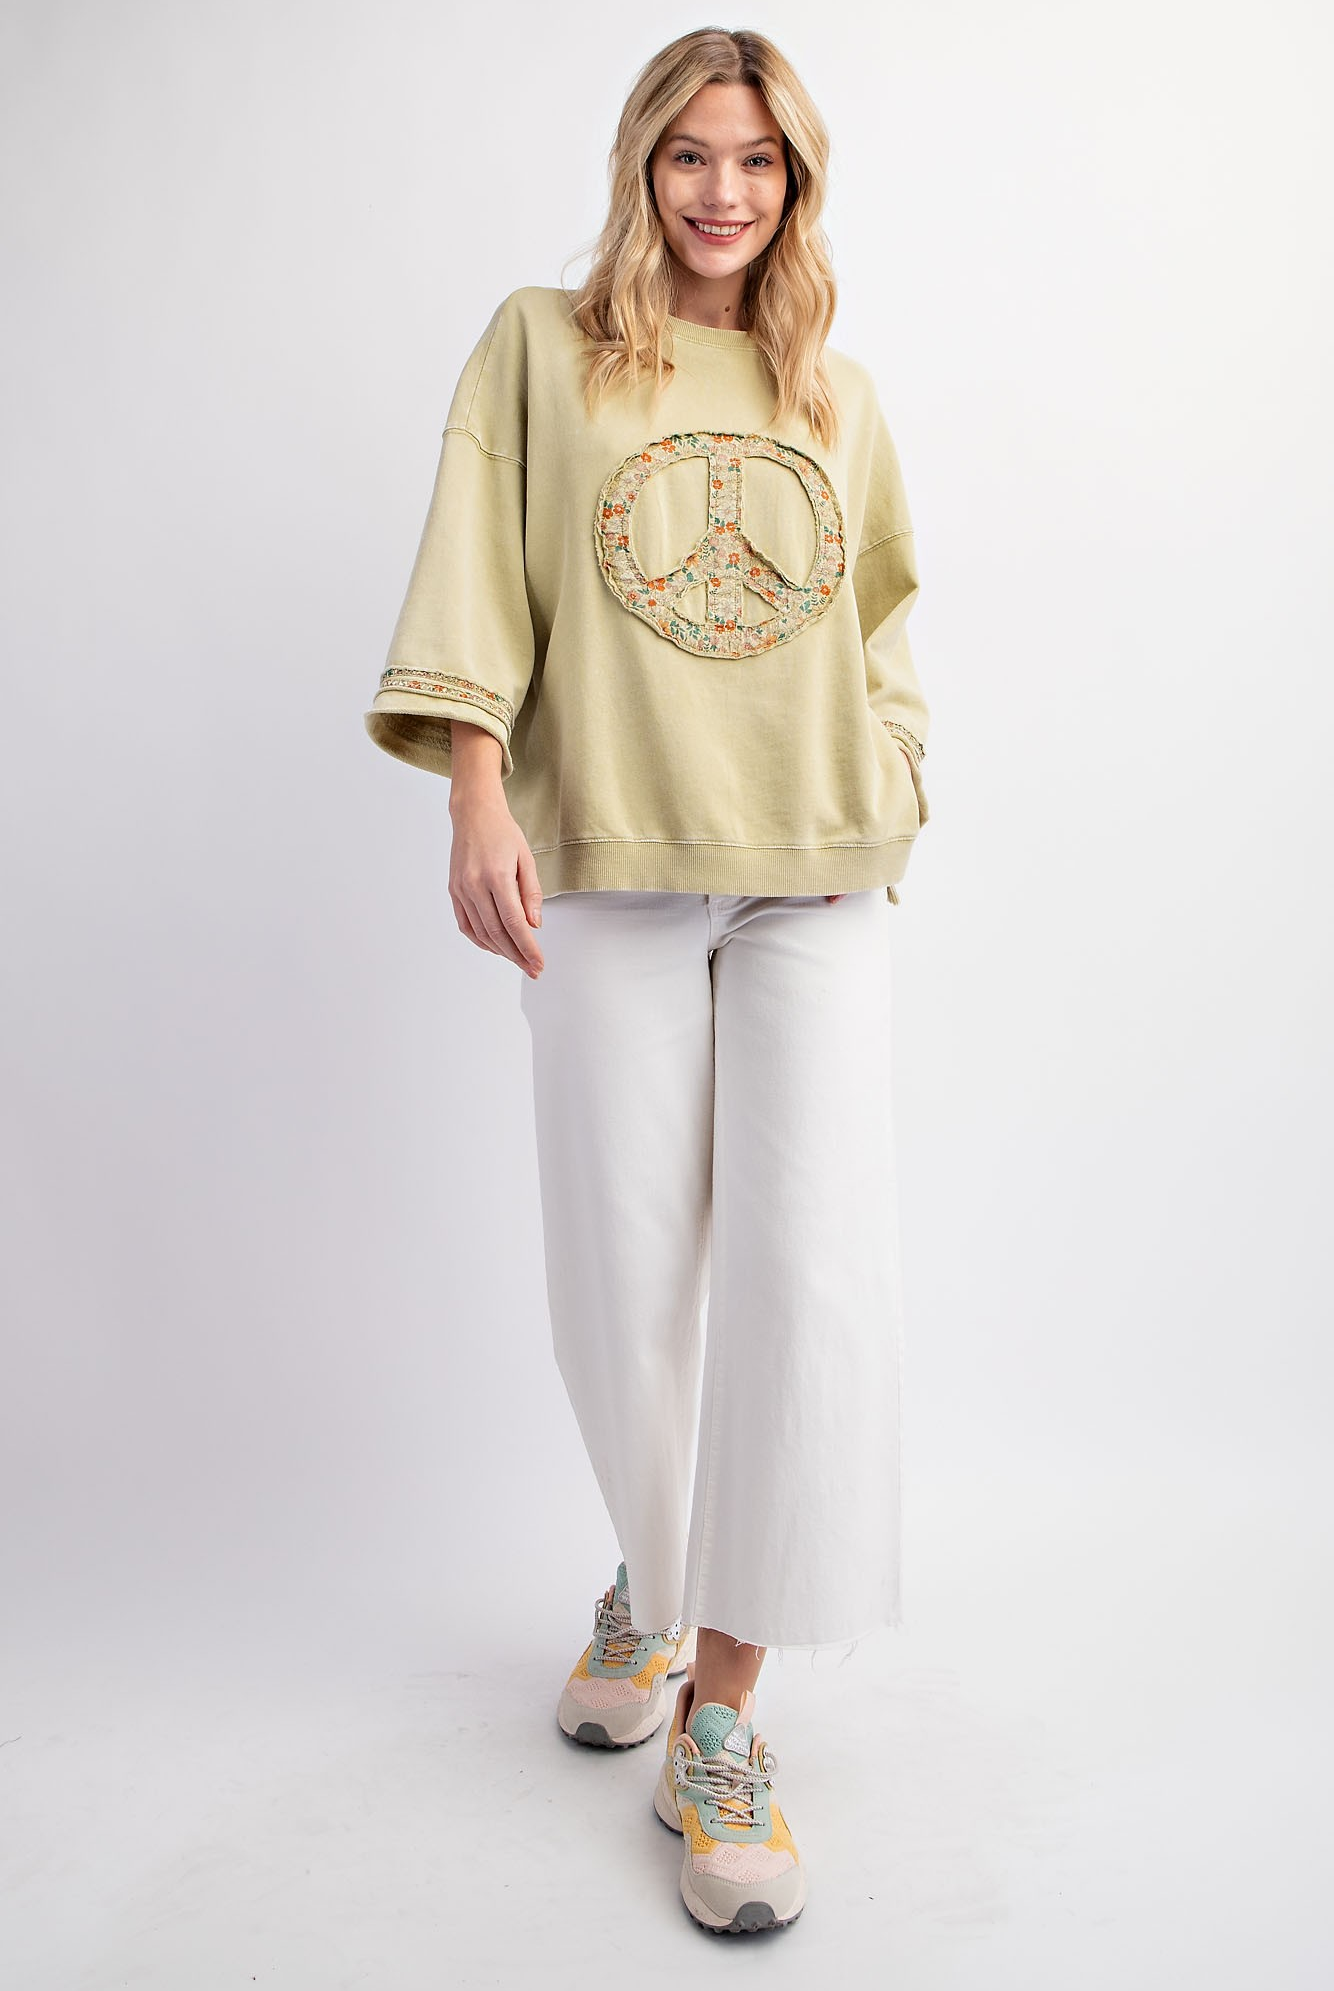 MINERAL WASHED TERRY KNIT FLORAL PEACE SIGN PULLOVER | STUFFOLOGY BOUTIQUE-Top-Easel-Stuffology - Where Vintage Meets Modern, A Boutique for Real Women in Crosbyton, TX